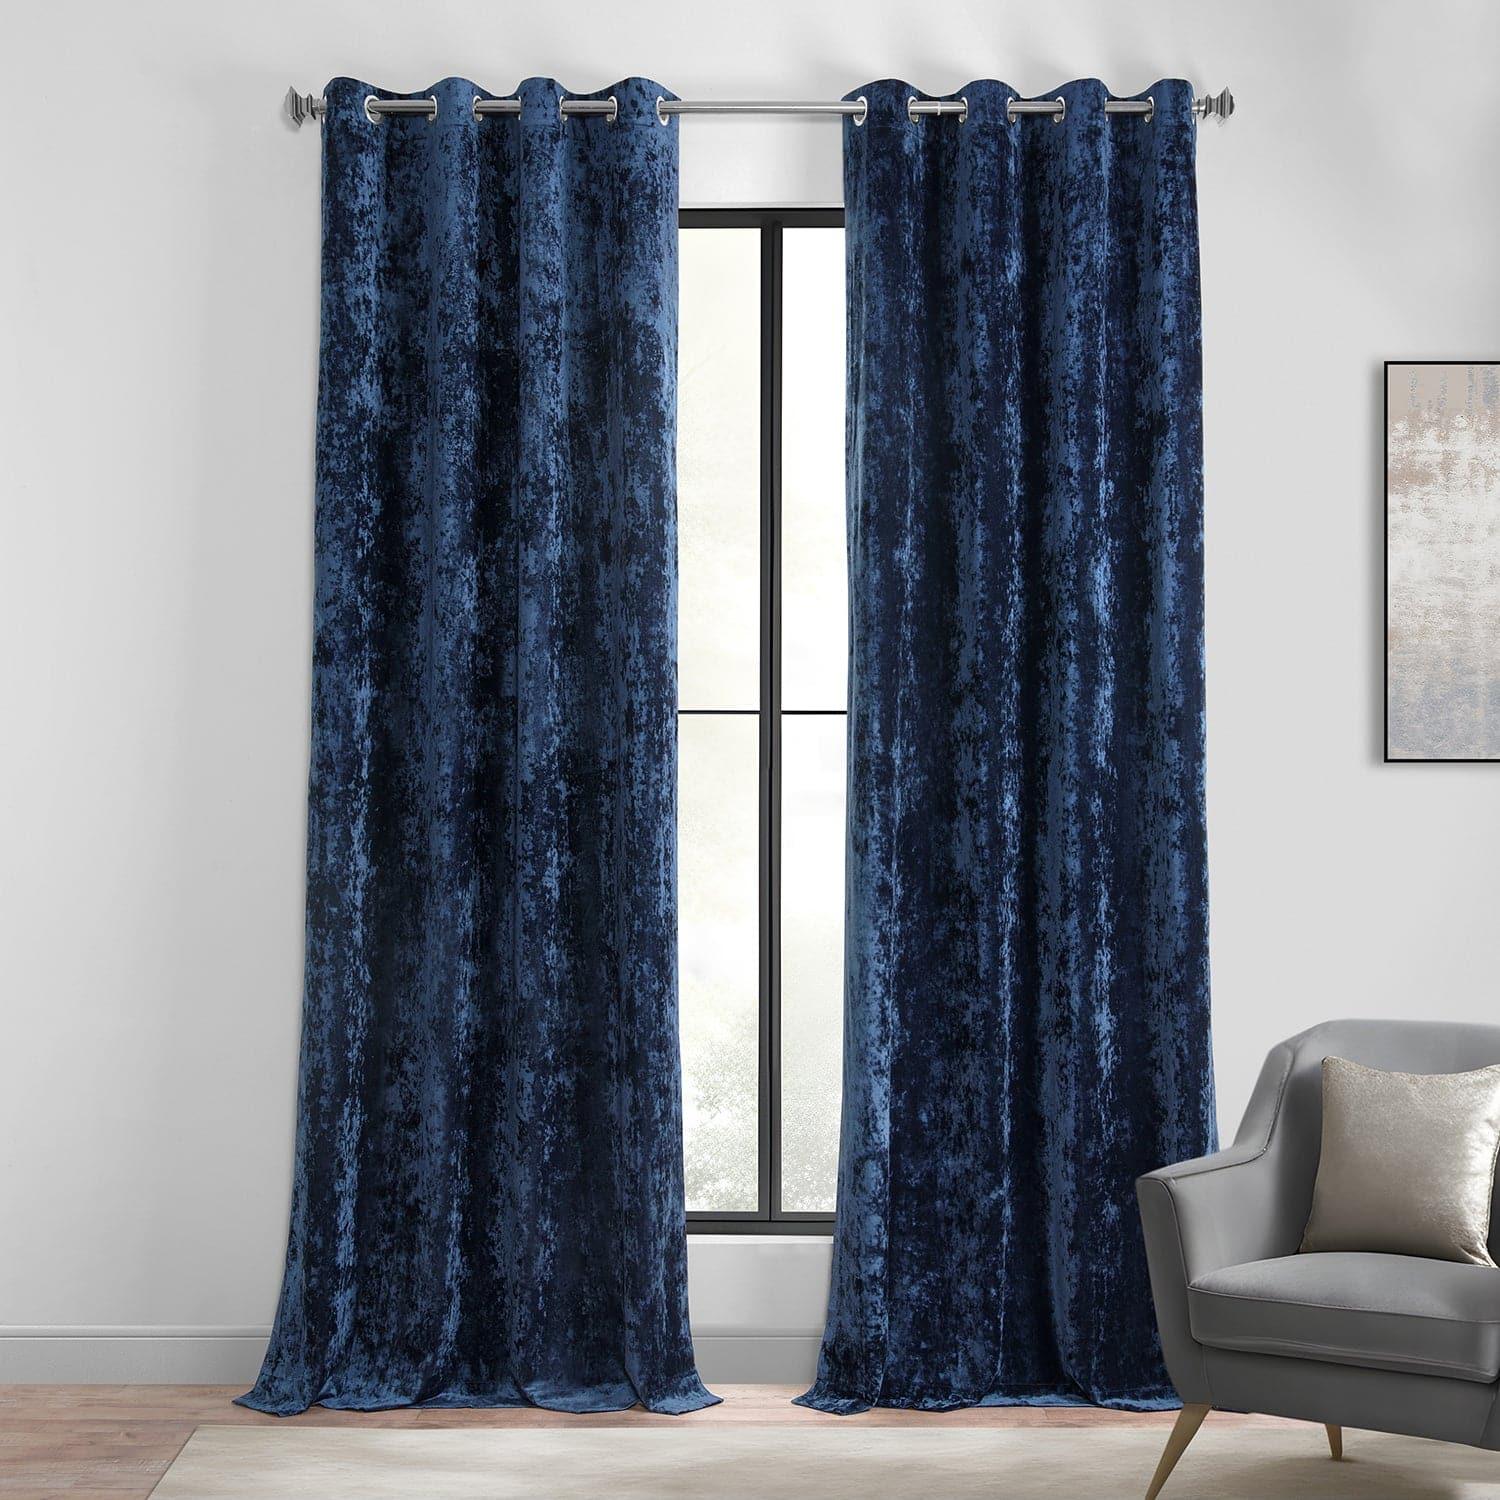 Champagne Luxury Crushed Velvet Lined Eyelet Curtain Pair